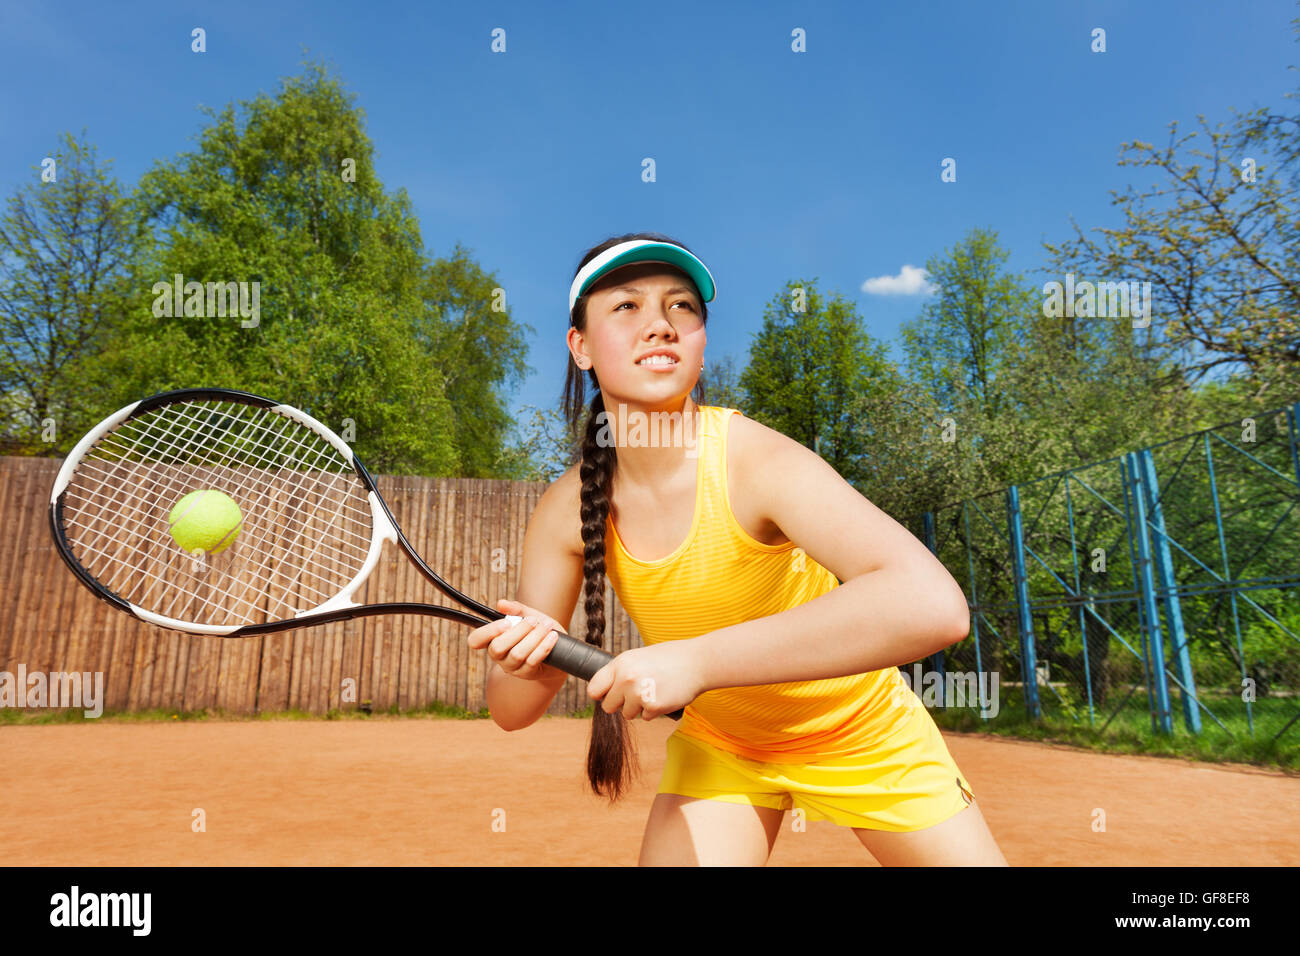 Professional female tennis player in action Stock Photo